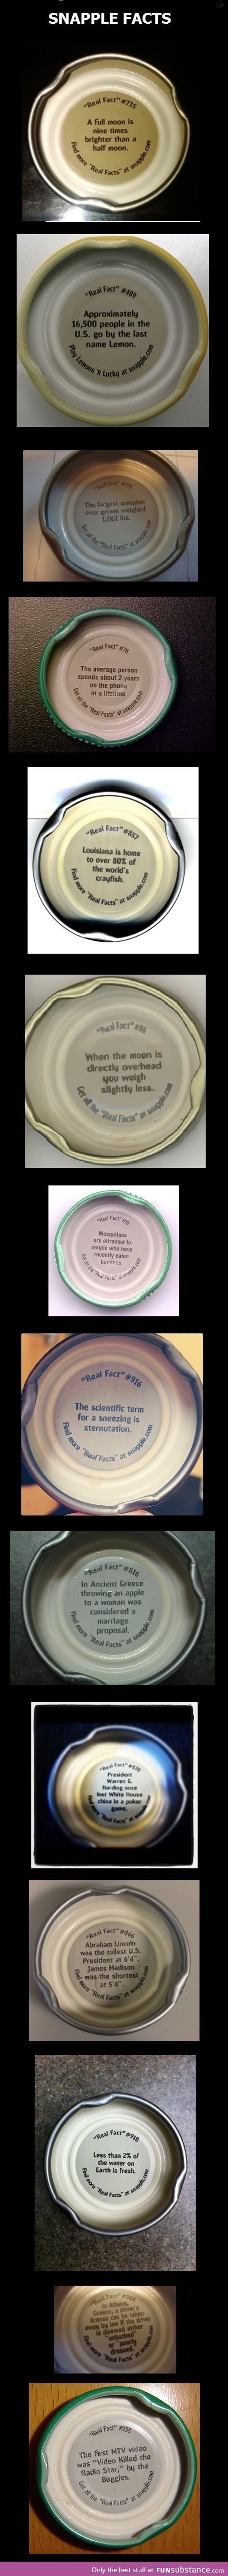 Snapple facts